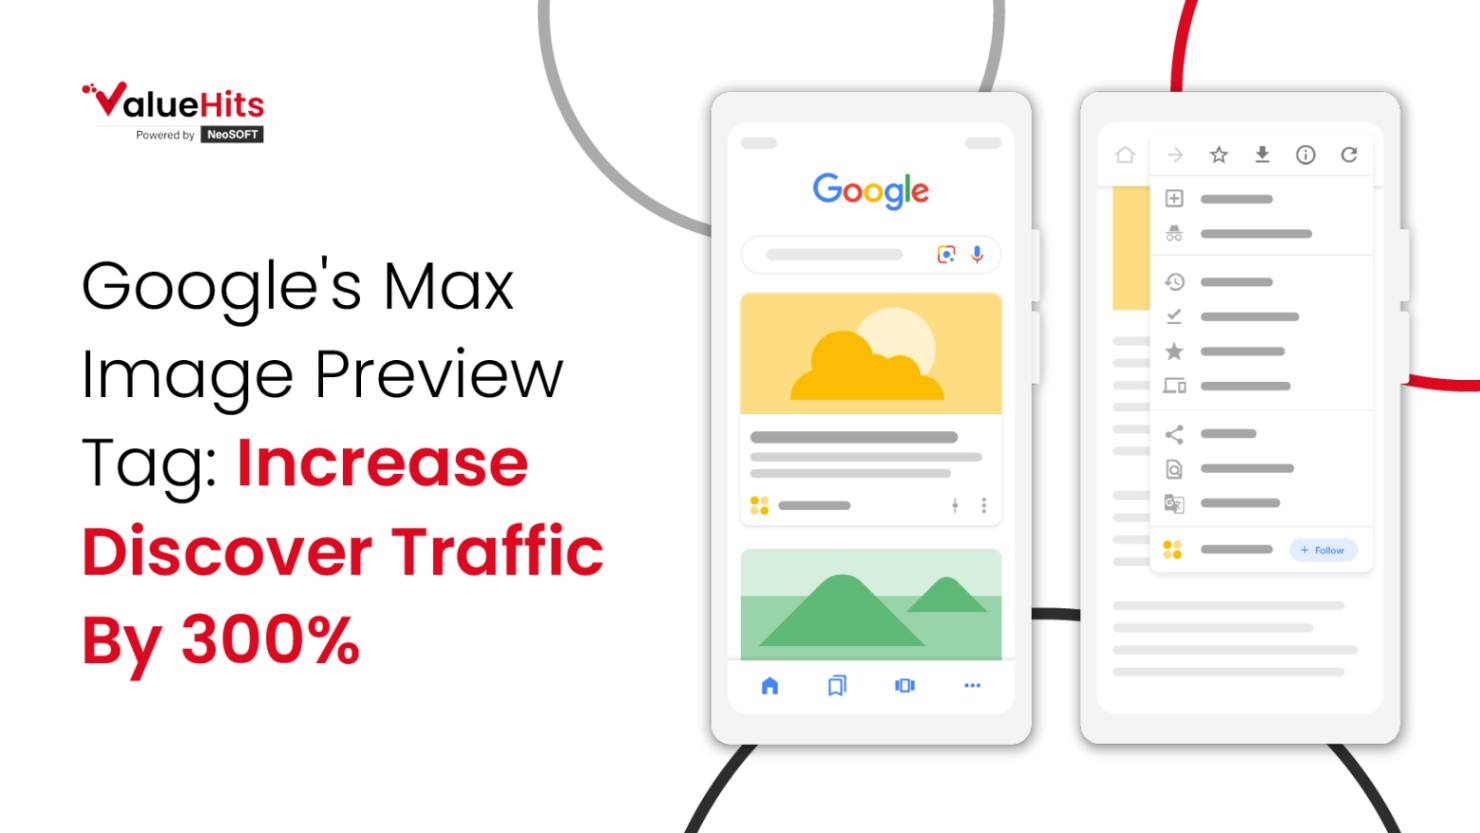 Google's Max Image Preview Tag: Increase Discover Traffic By 300%